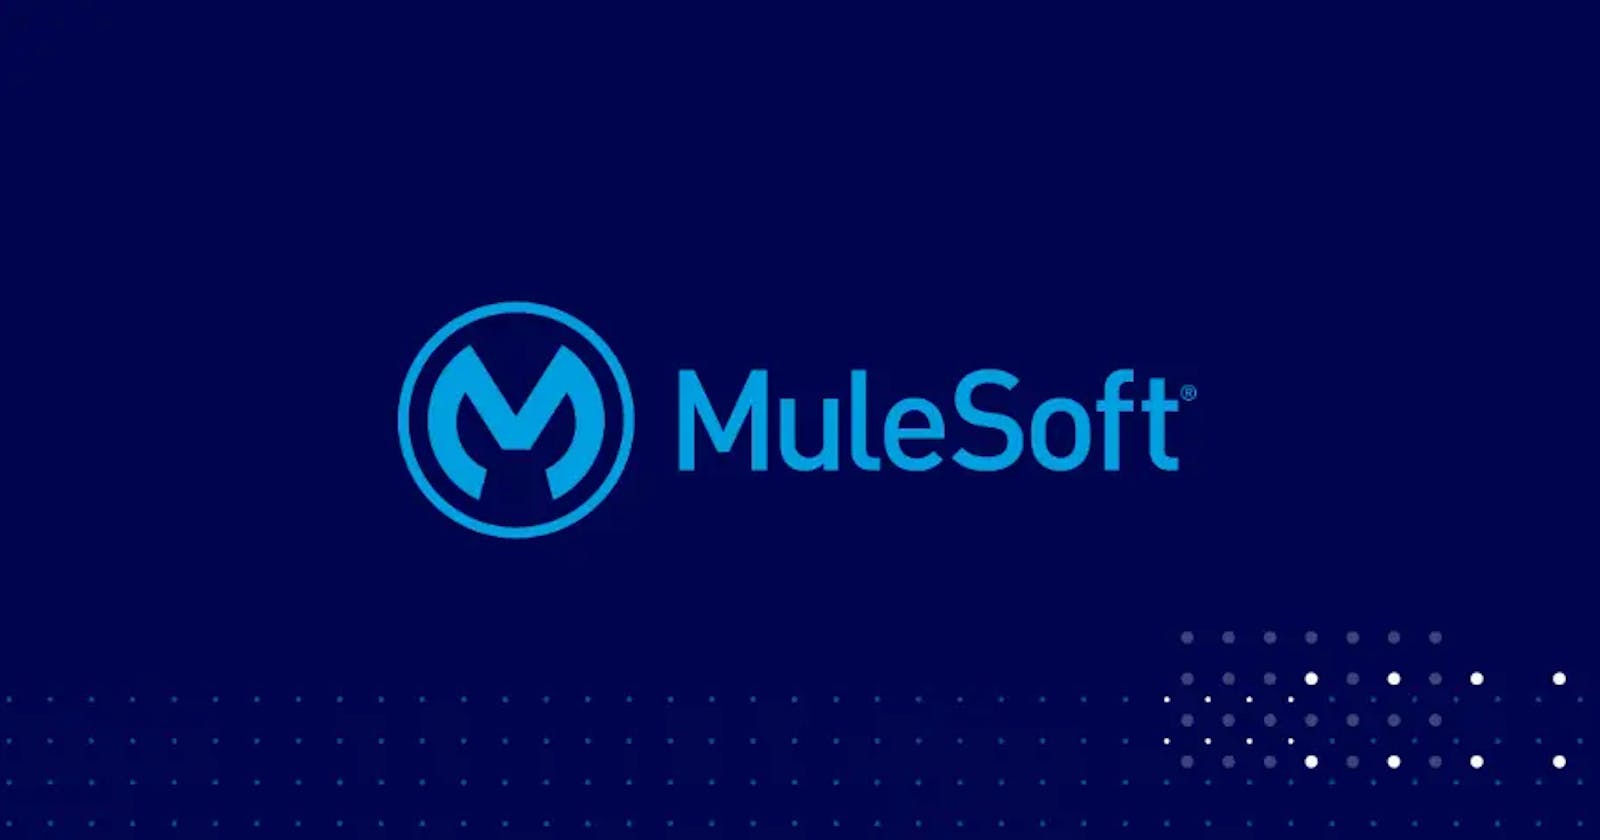 Brief Introduction to MuleSoft